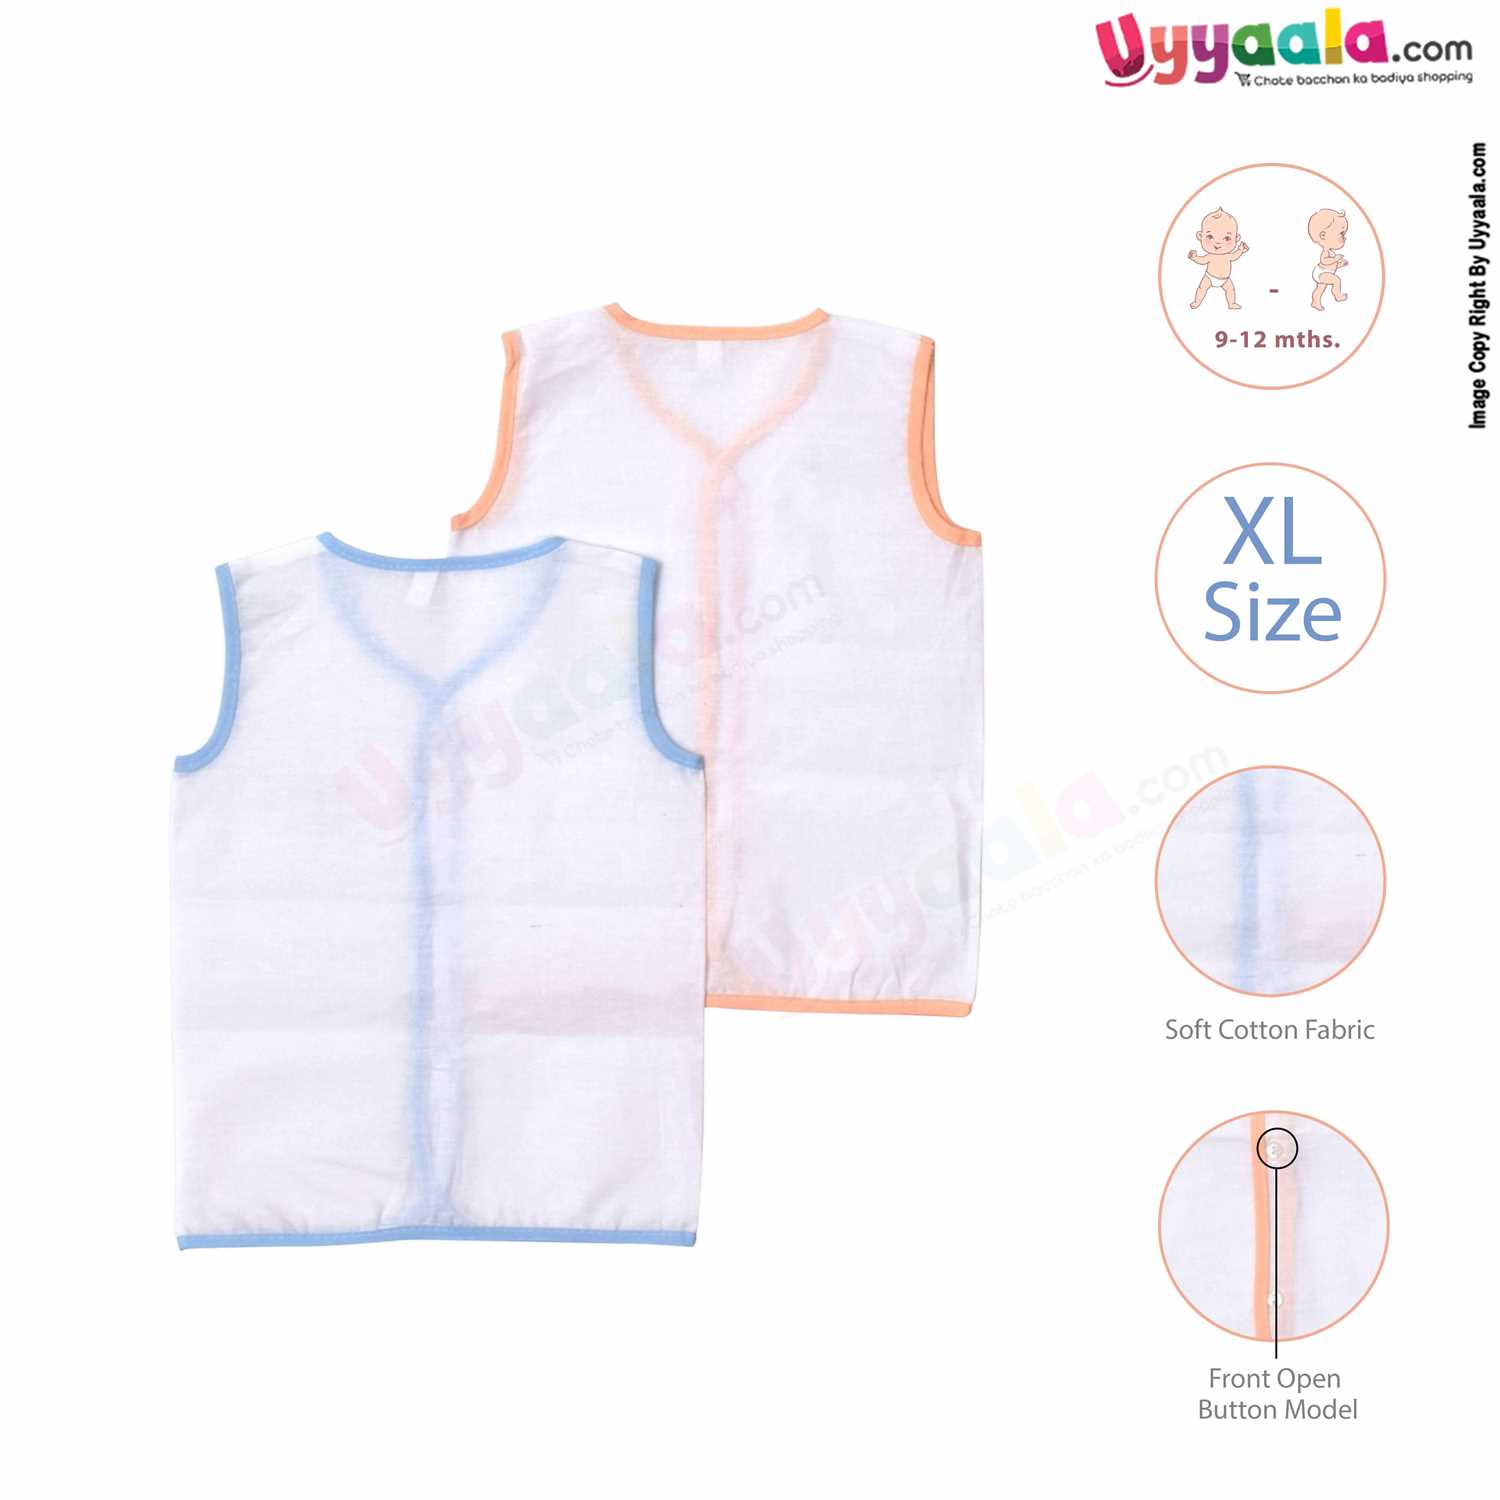 SNUG UP Sleeveless Baby Jabla Set, Front Opening Button Model, Premium Quality Cotton Baby Wear, (9-12M) XL, 2Pack